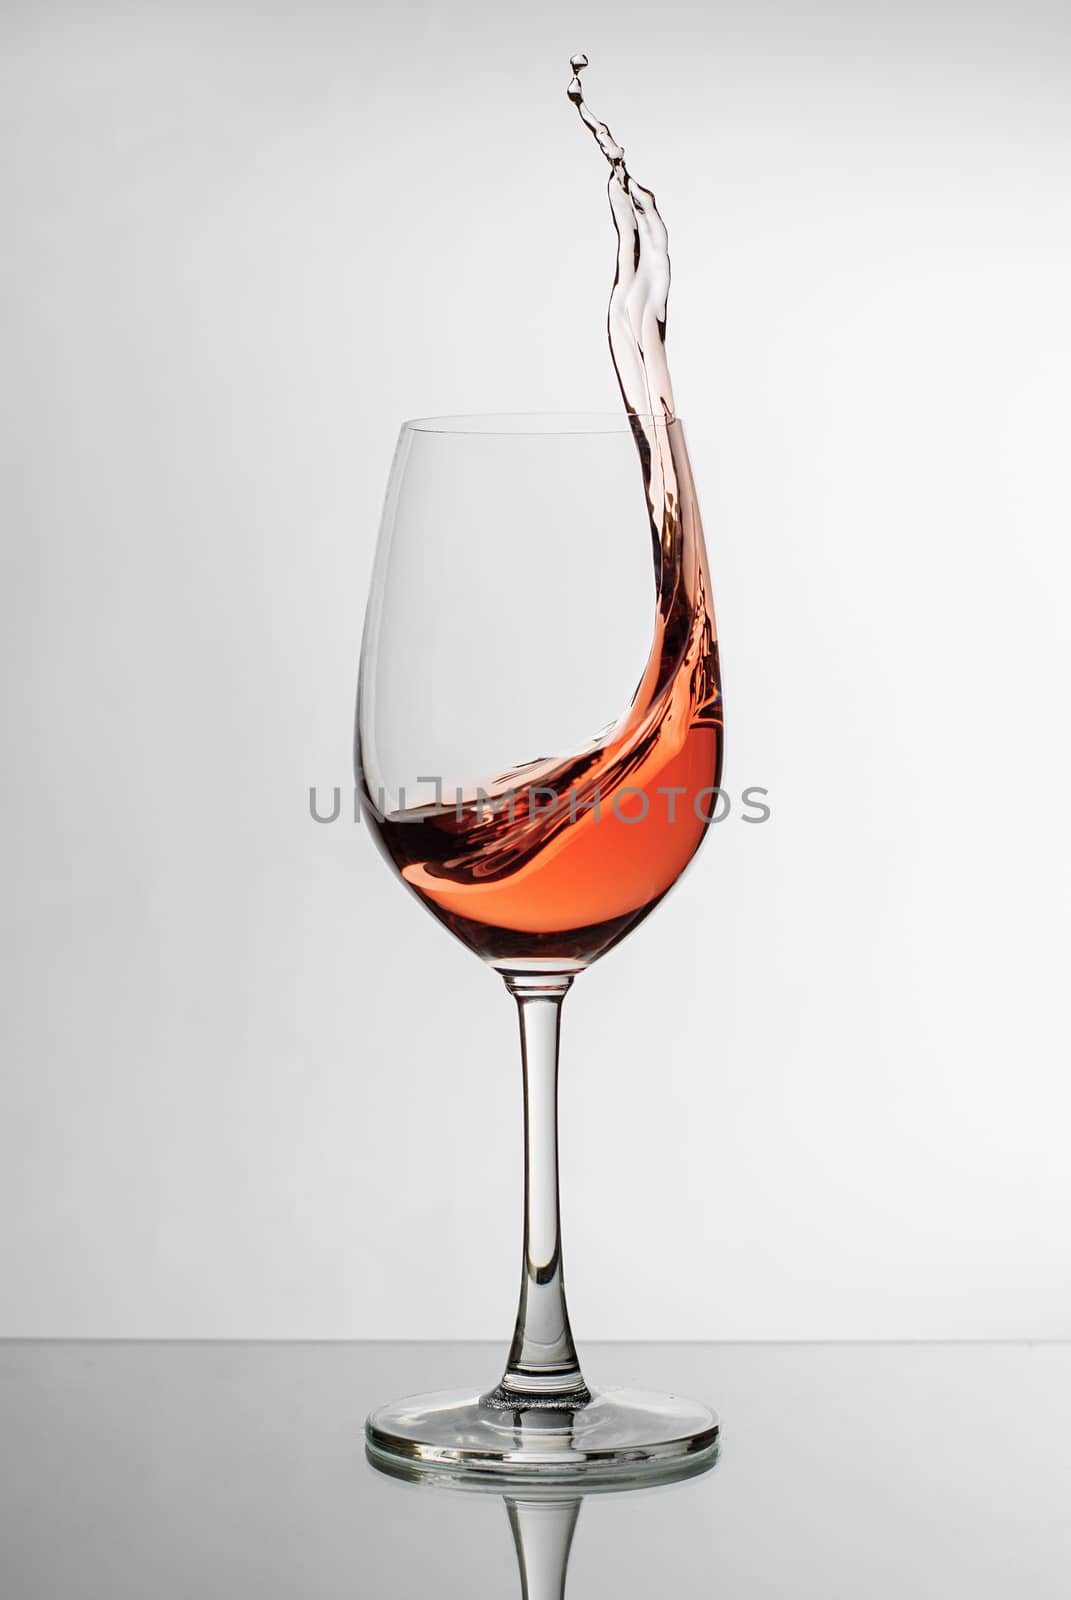 Pink wine splashing up the side of a wineglass in a freeze motion image suspended in the air over a reflective white studio background